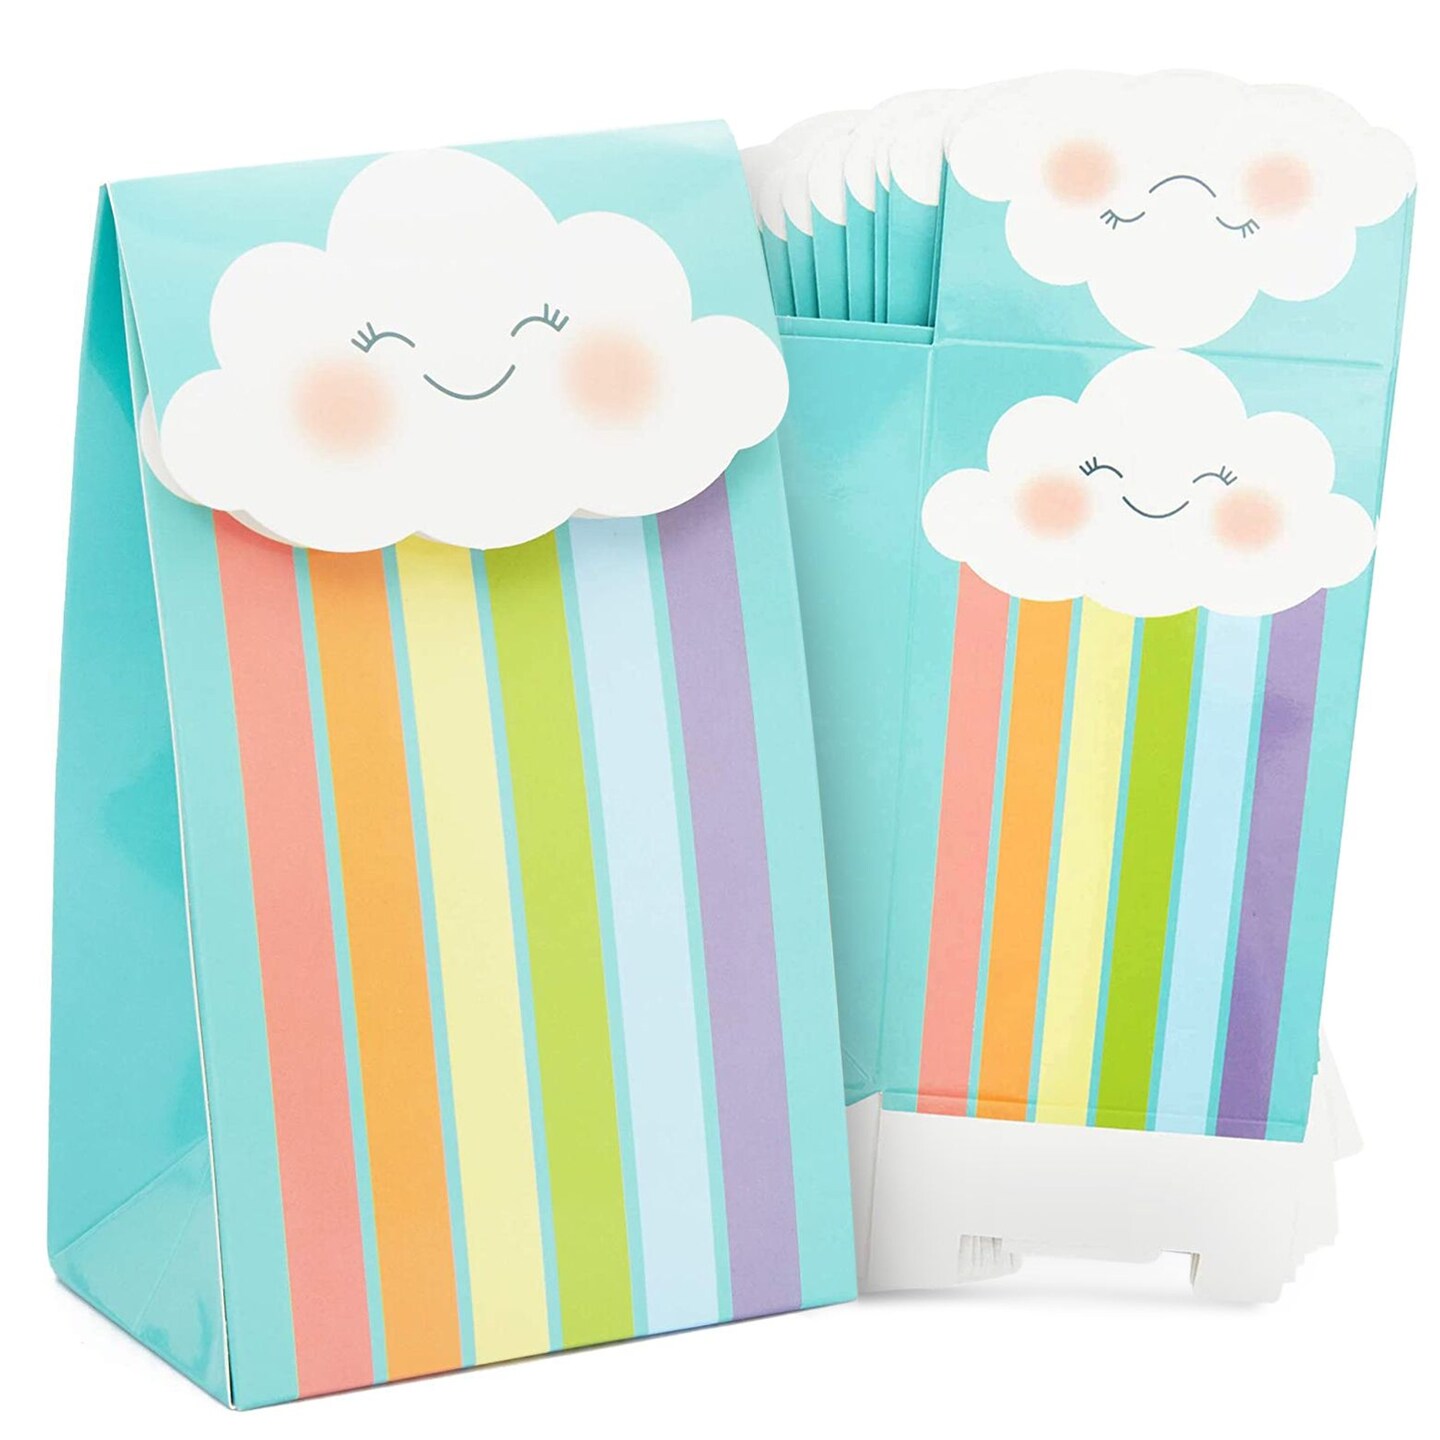 24 Pack of Rainbow Goodie Bags with Stickers for Birthday Supplies, Rainbow  Party Favors, Treats, Candies, Baby Shower Decorations (Turquoise, 6.5 x 4